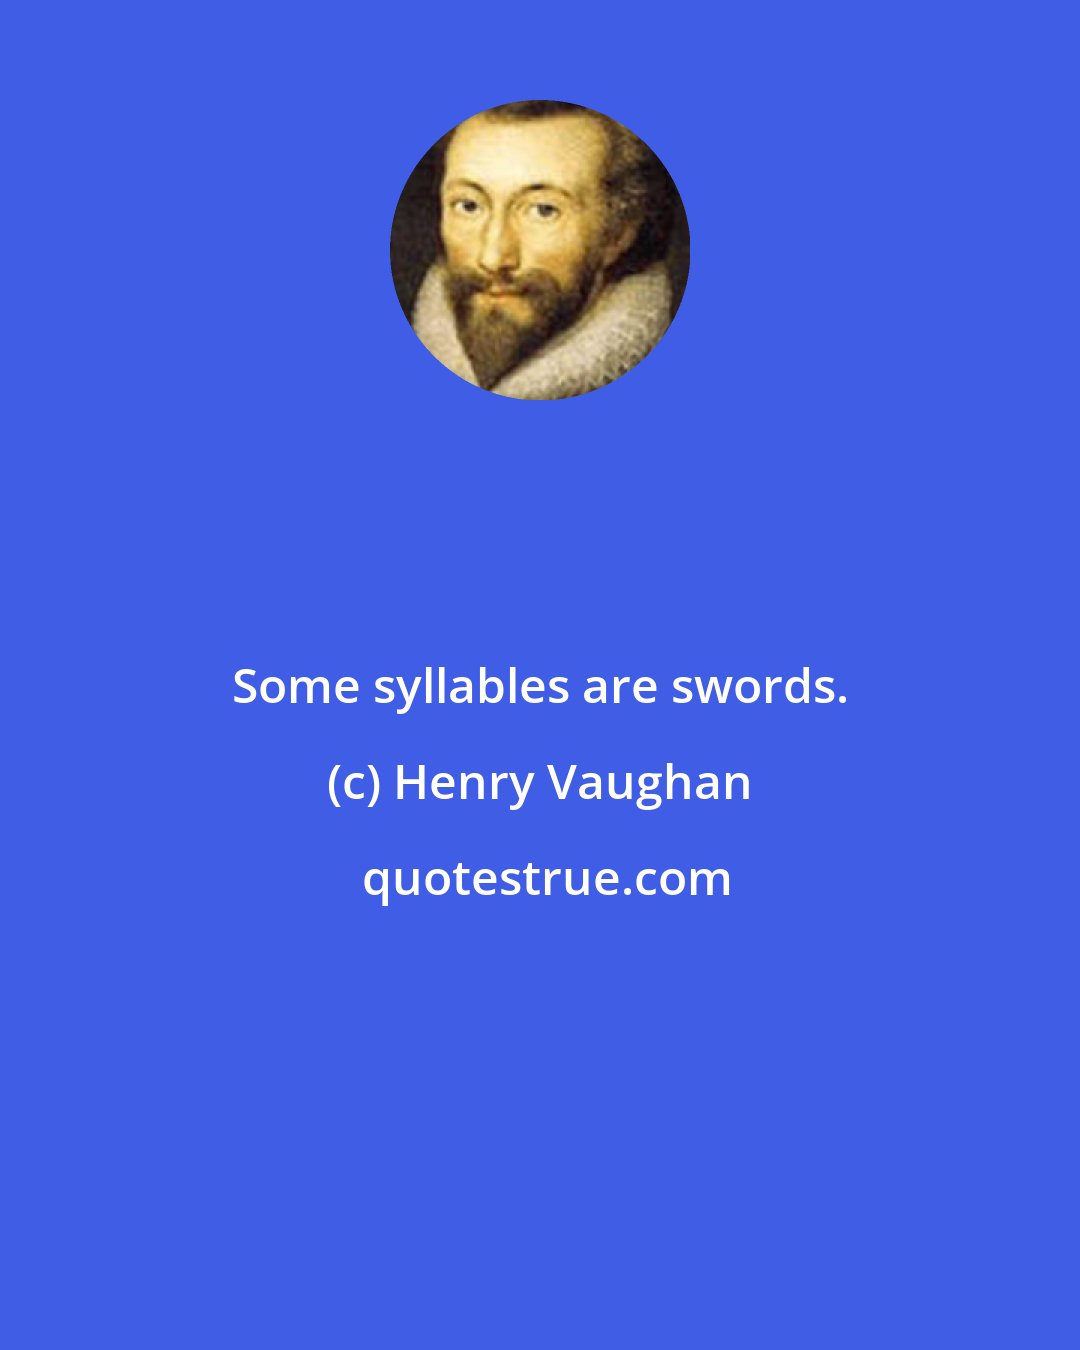 Henry Vaughan: Some syllables are swords.